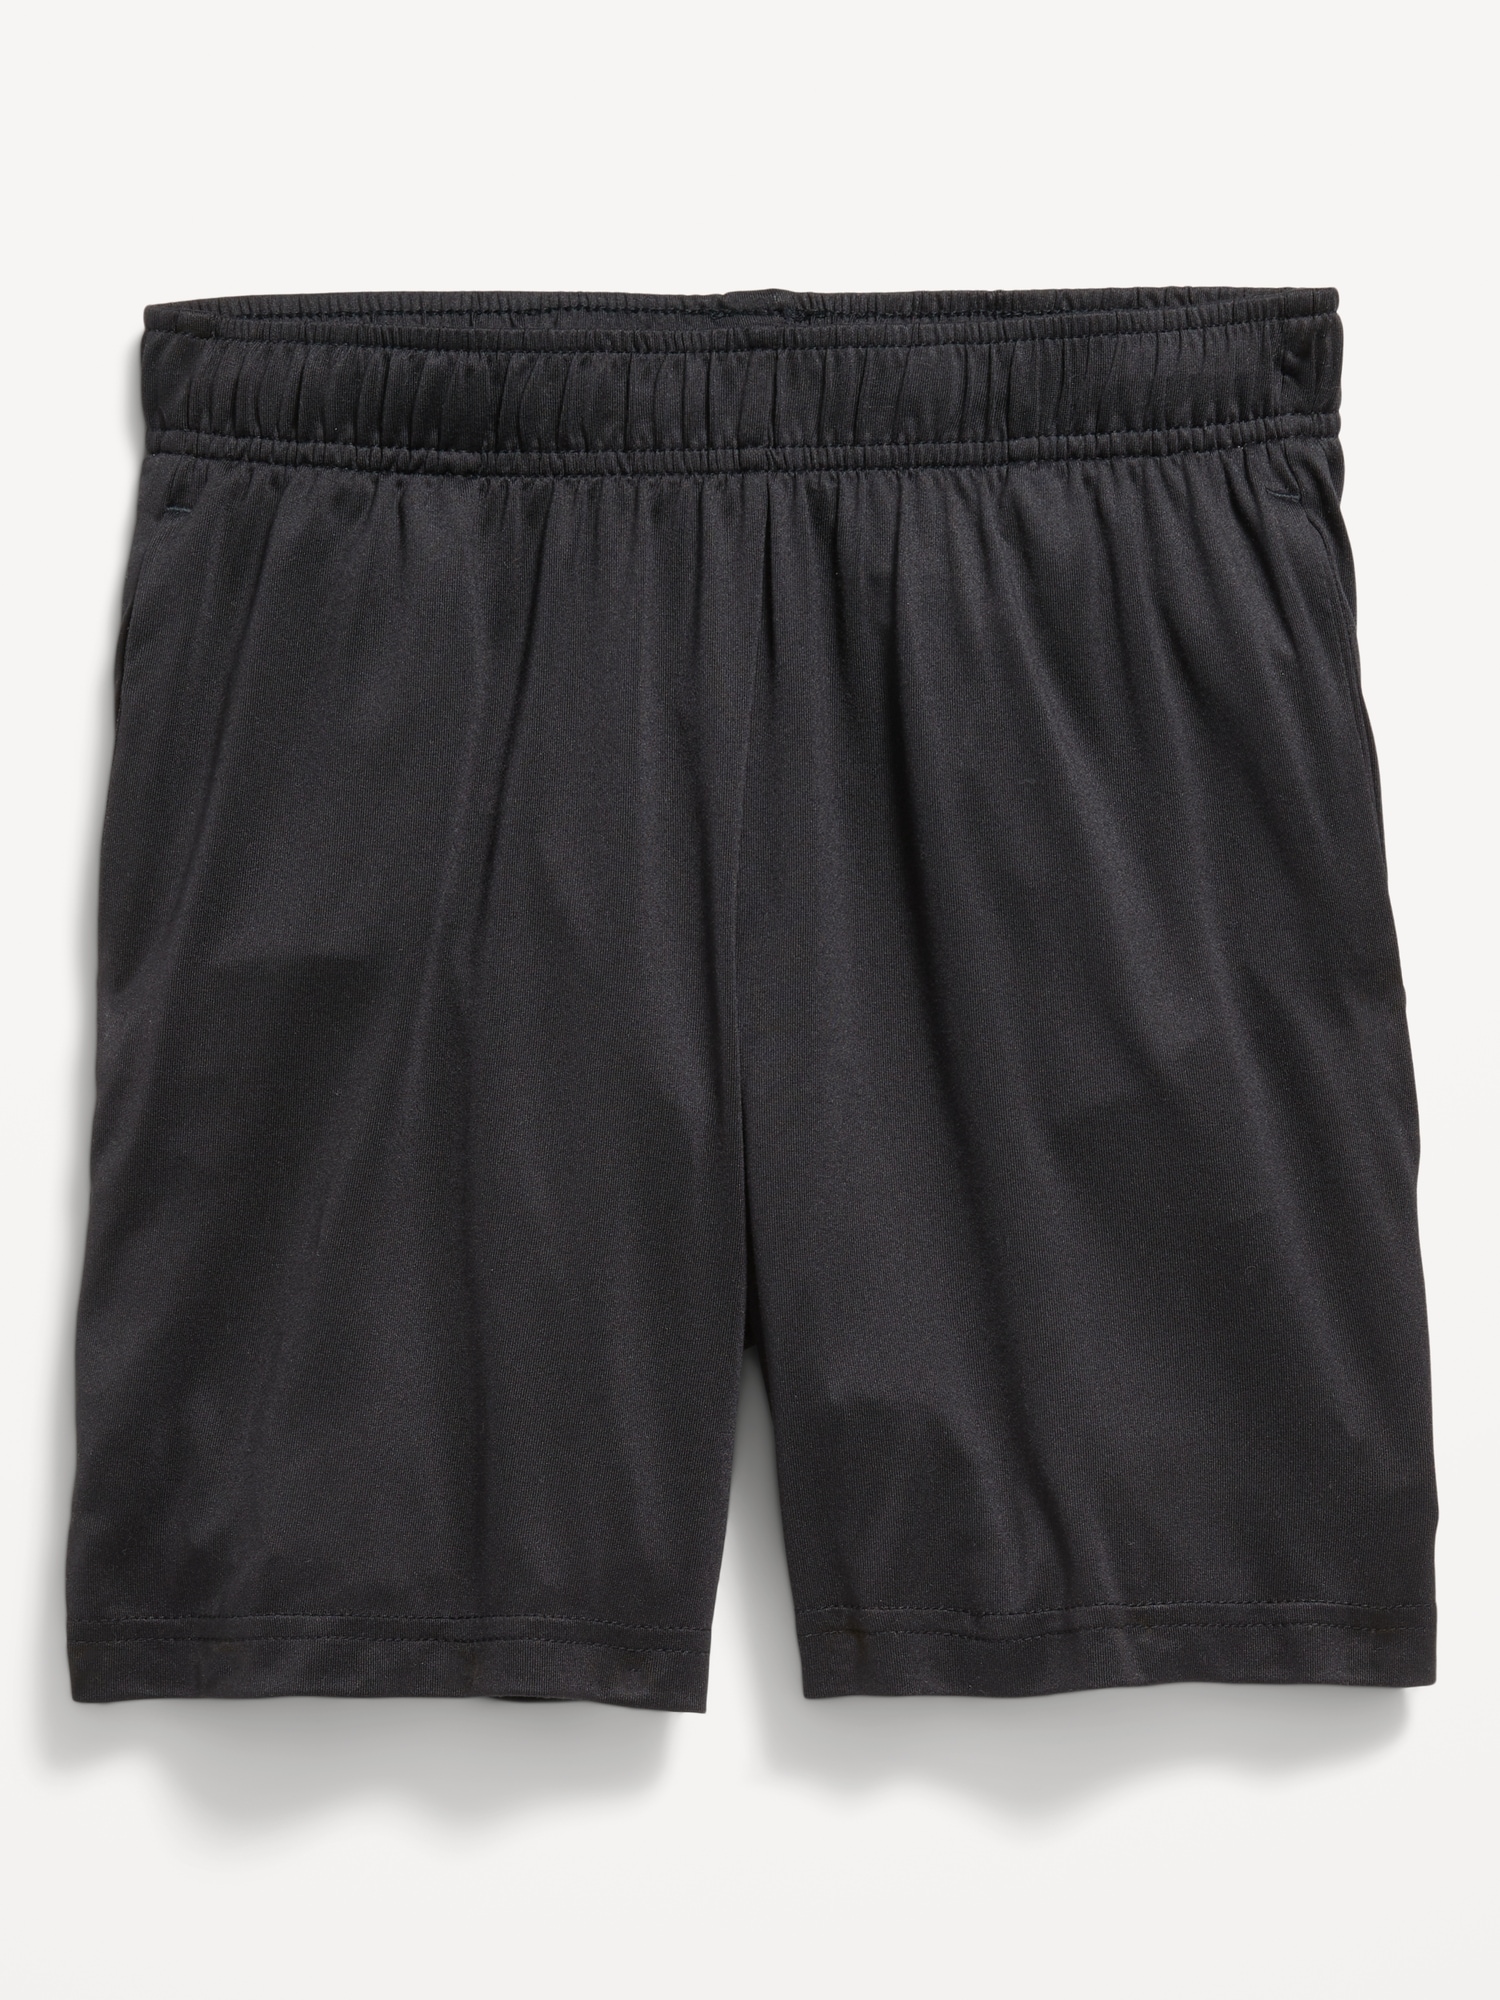 Cloud 94 Soft Performance Shorts for Boys